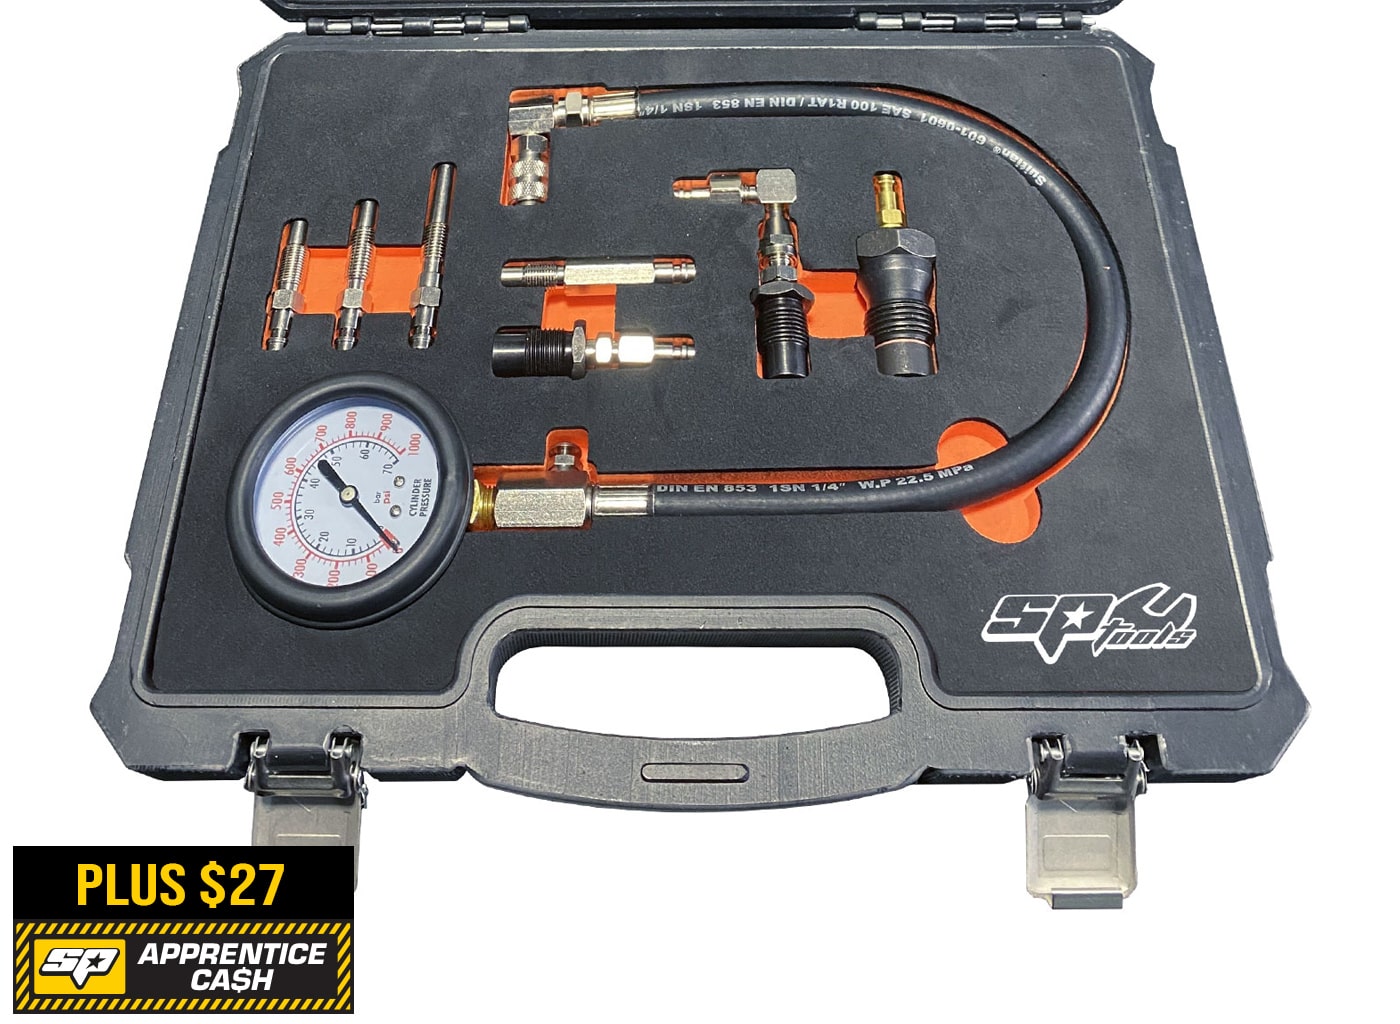 Diesel Compression Tester Kit, Automotive - SP66037 by SP Tools